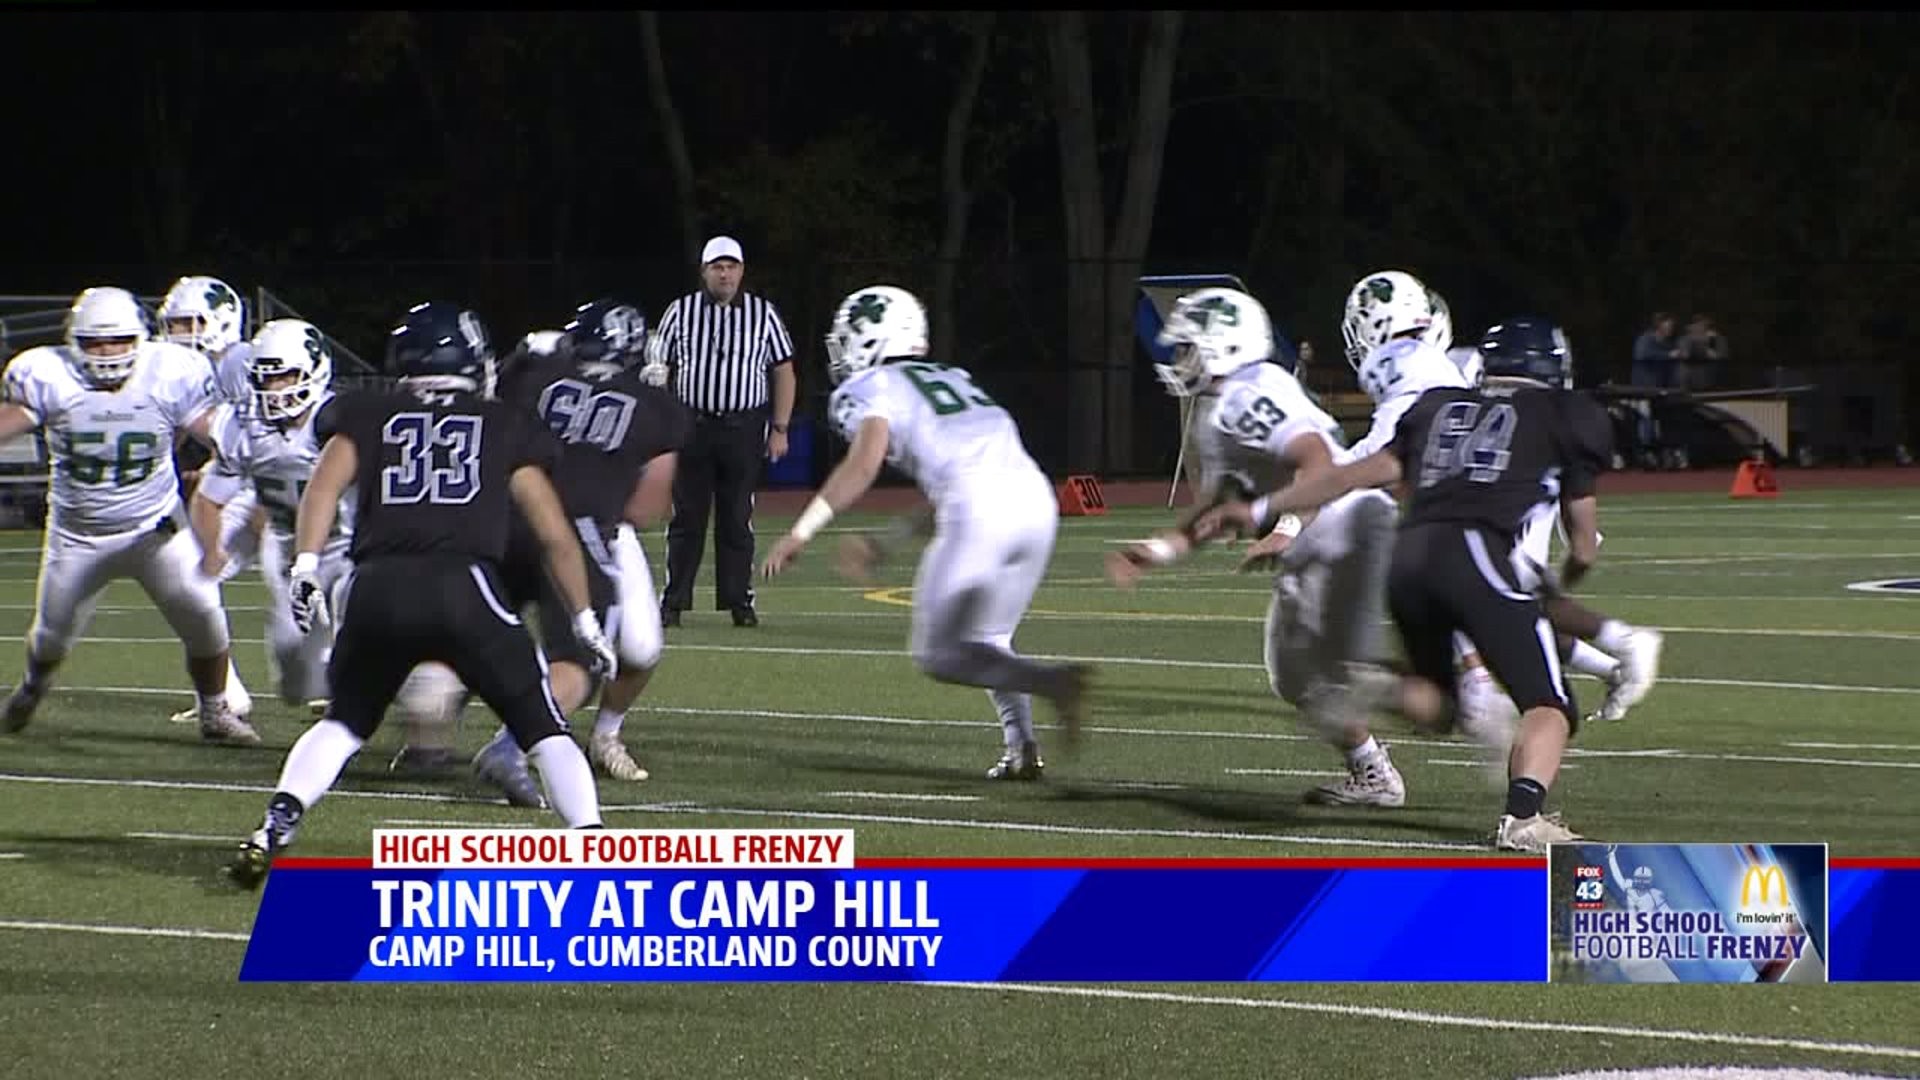 HSFF week 10 Trinity at Camp Hill highlights